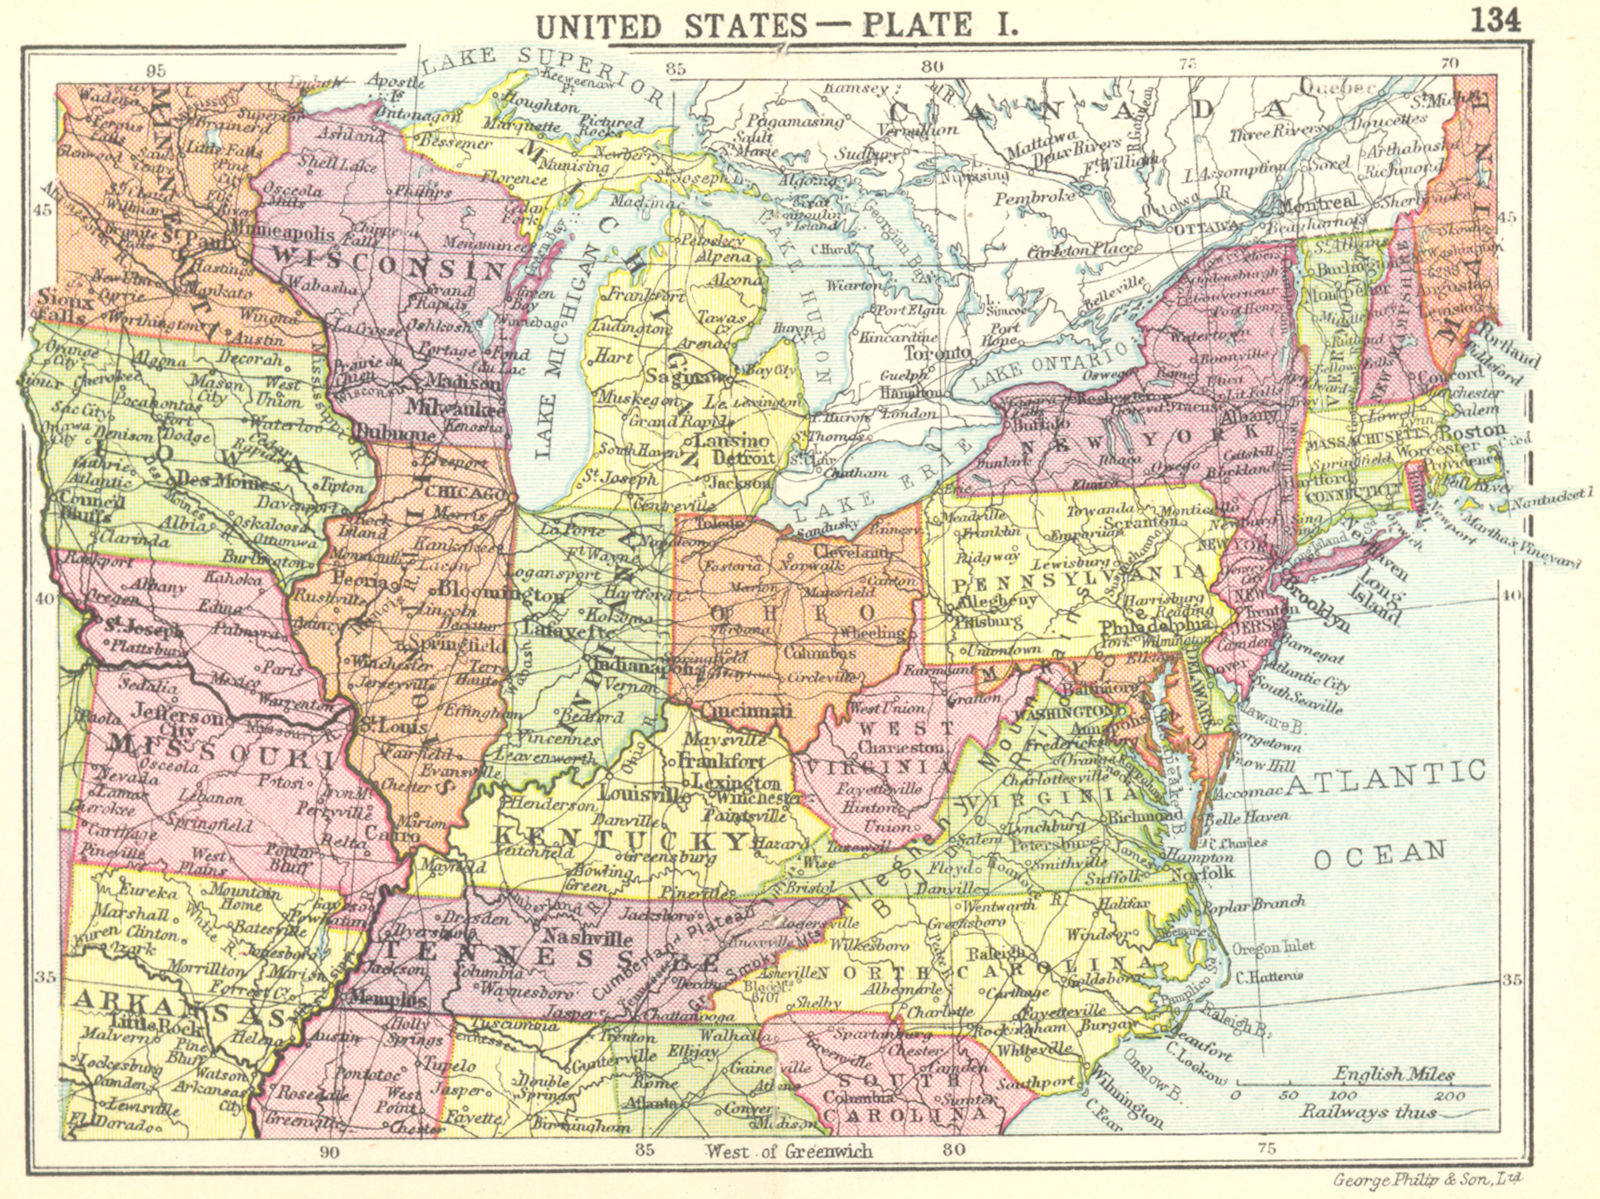 USA. United States-Plate I; Small map 1912 old antique vintage plan chart